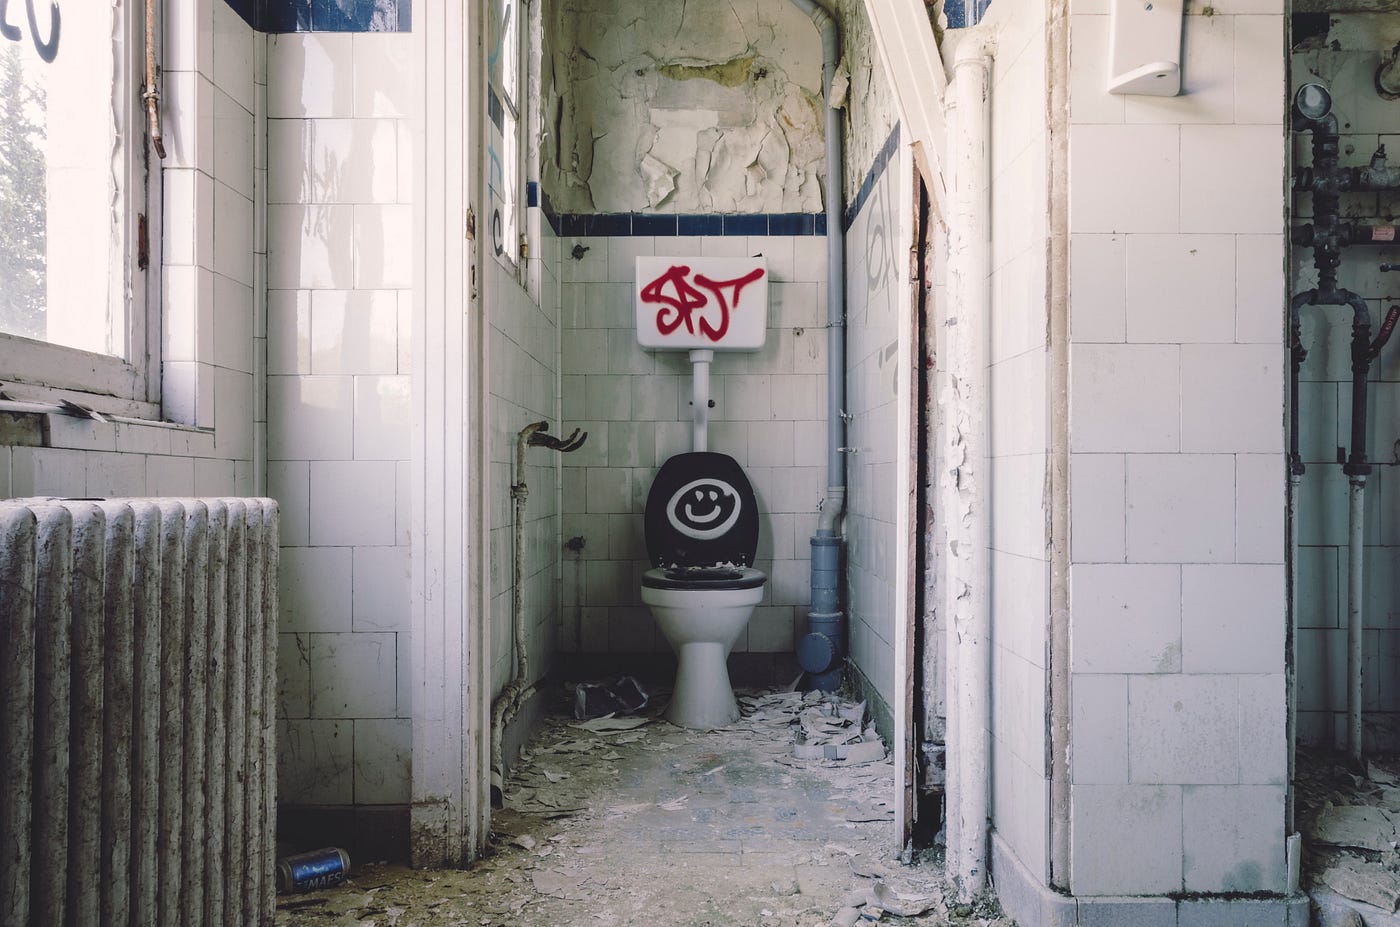 The Terror in the Toilet Whats Up With Bathroom Ghosts, and Why Are They Watching OUR Unfinished Business? by Cat Baklarz Writers Blokke Medium photo